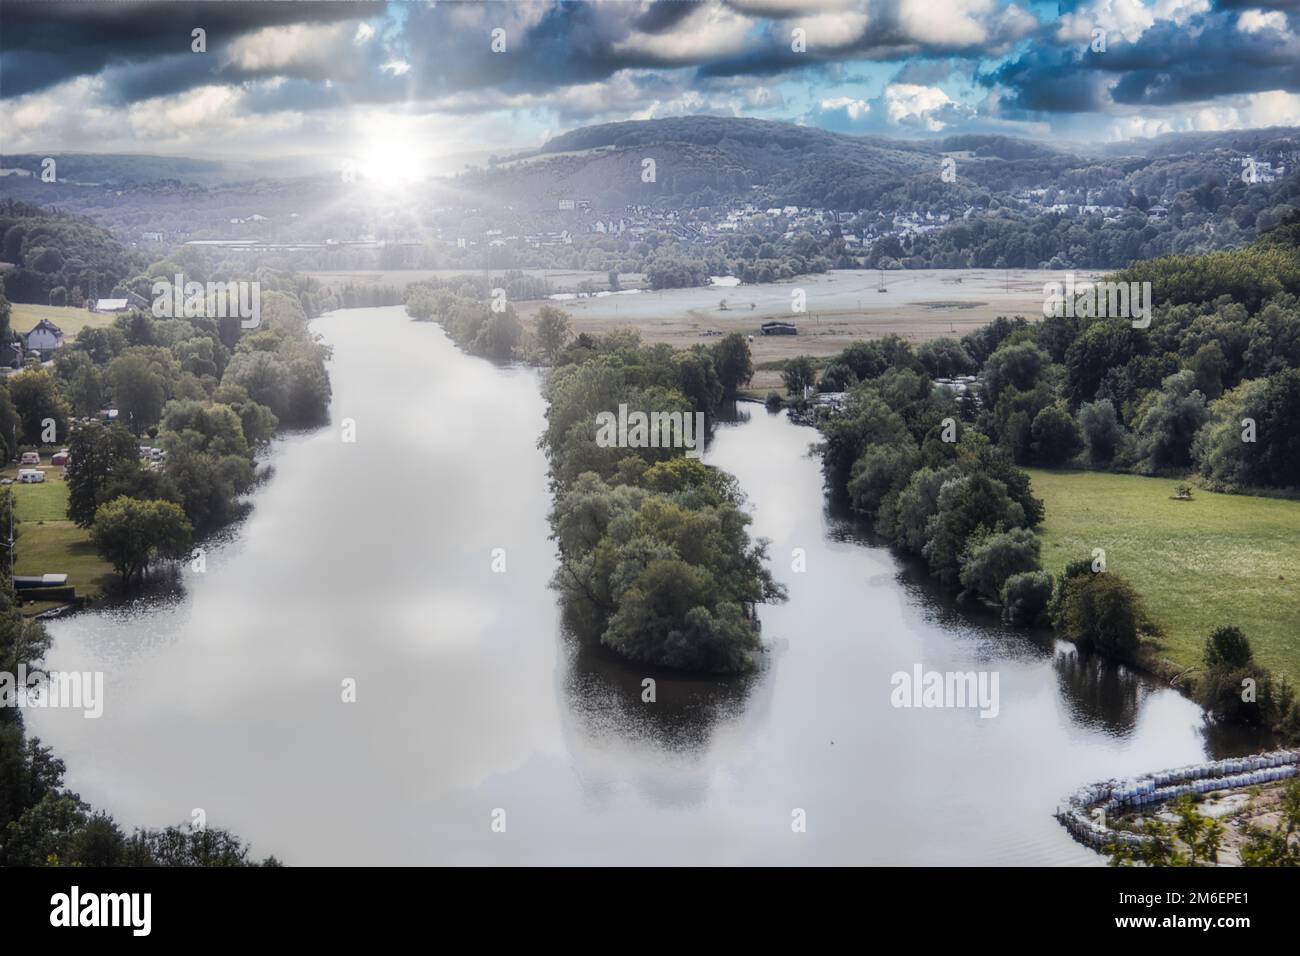 Ruhr valley in Witten with river course Stock Photo